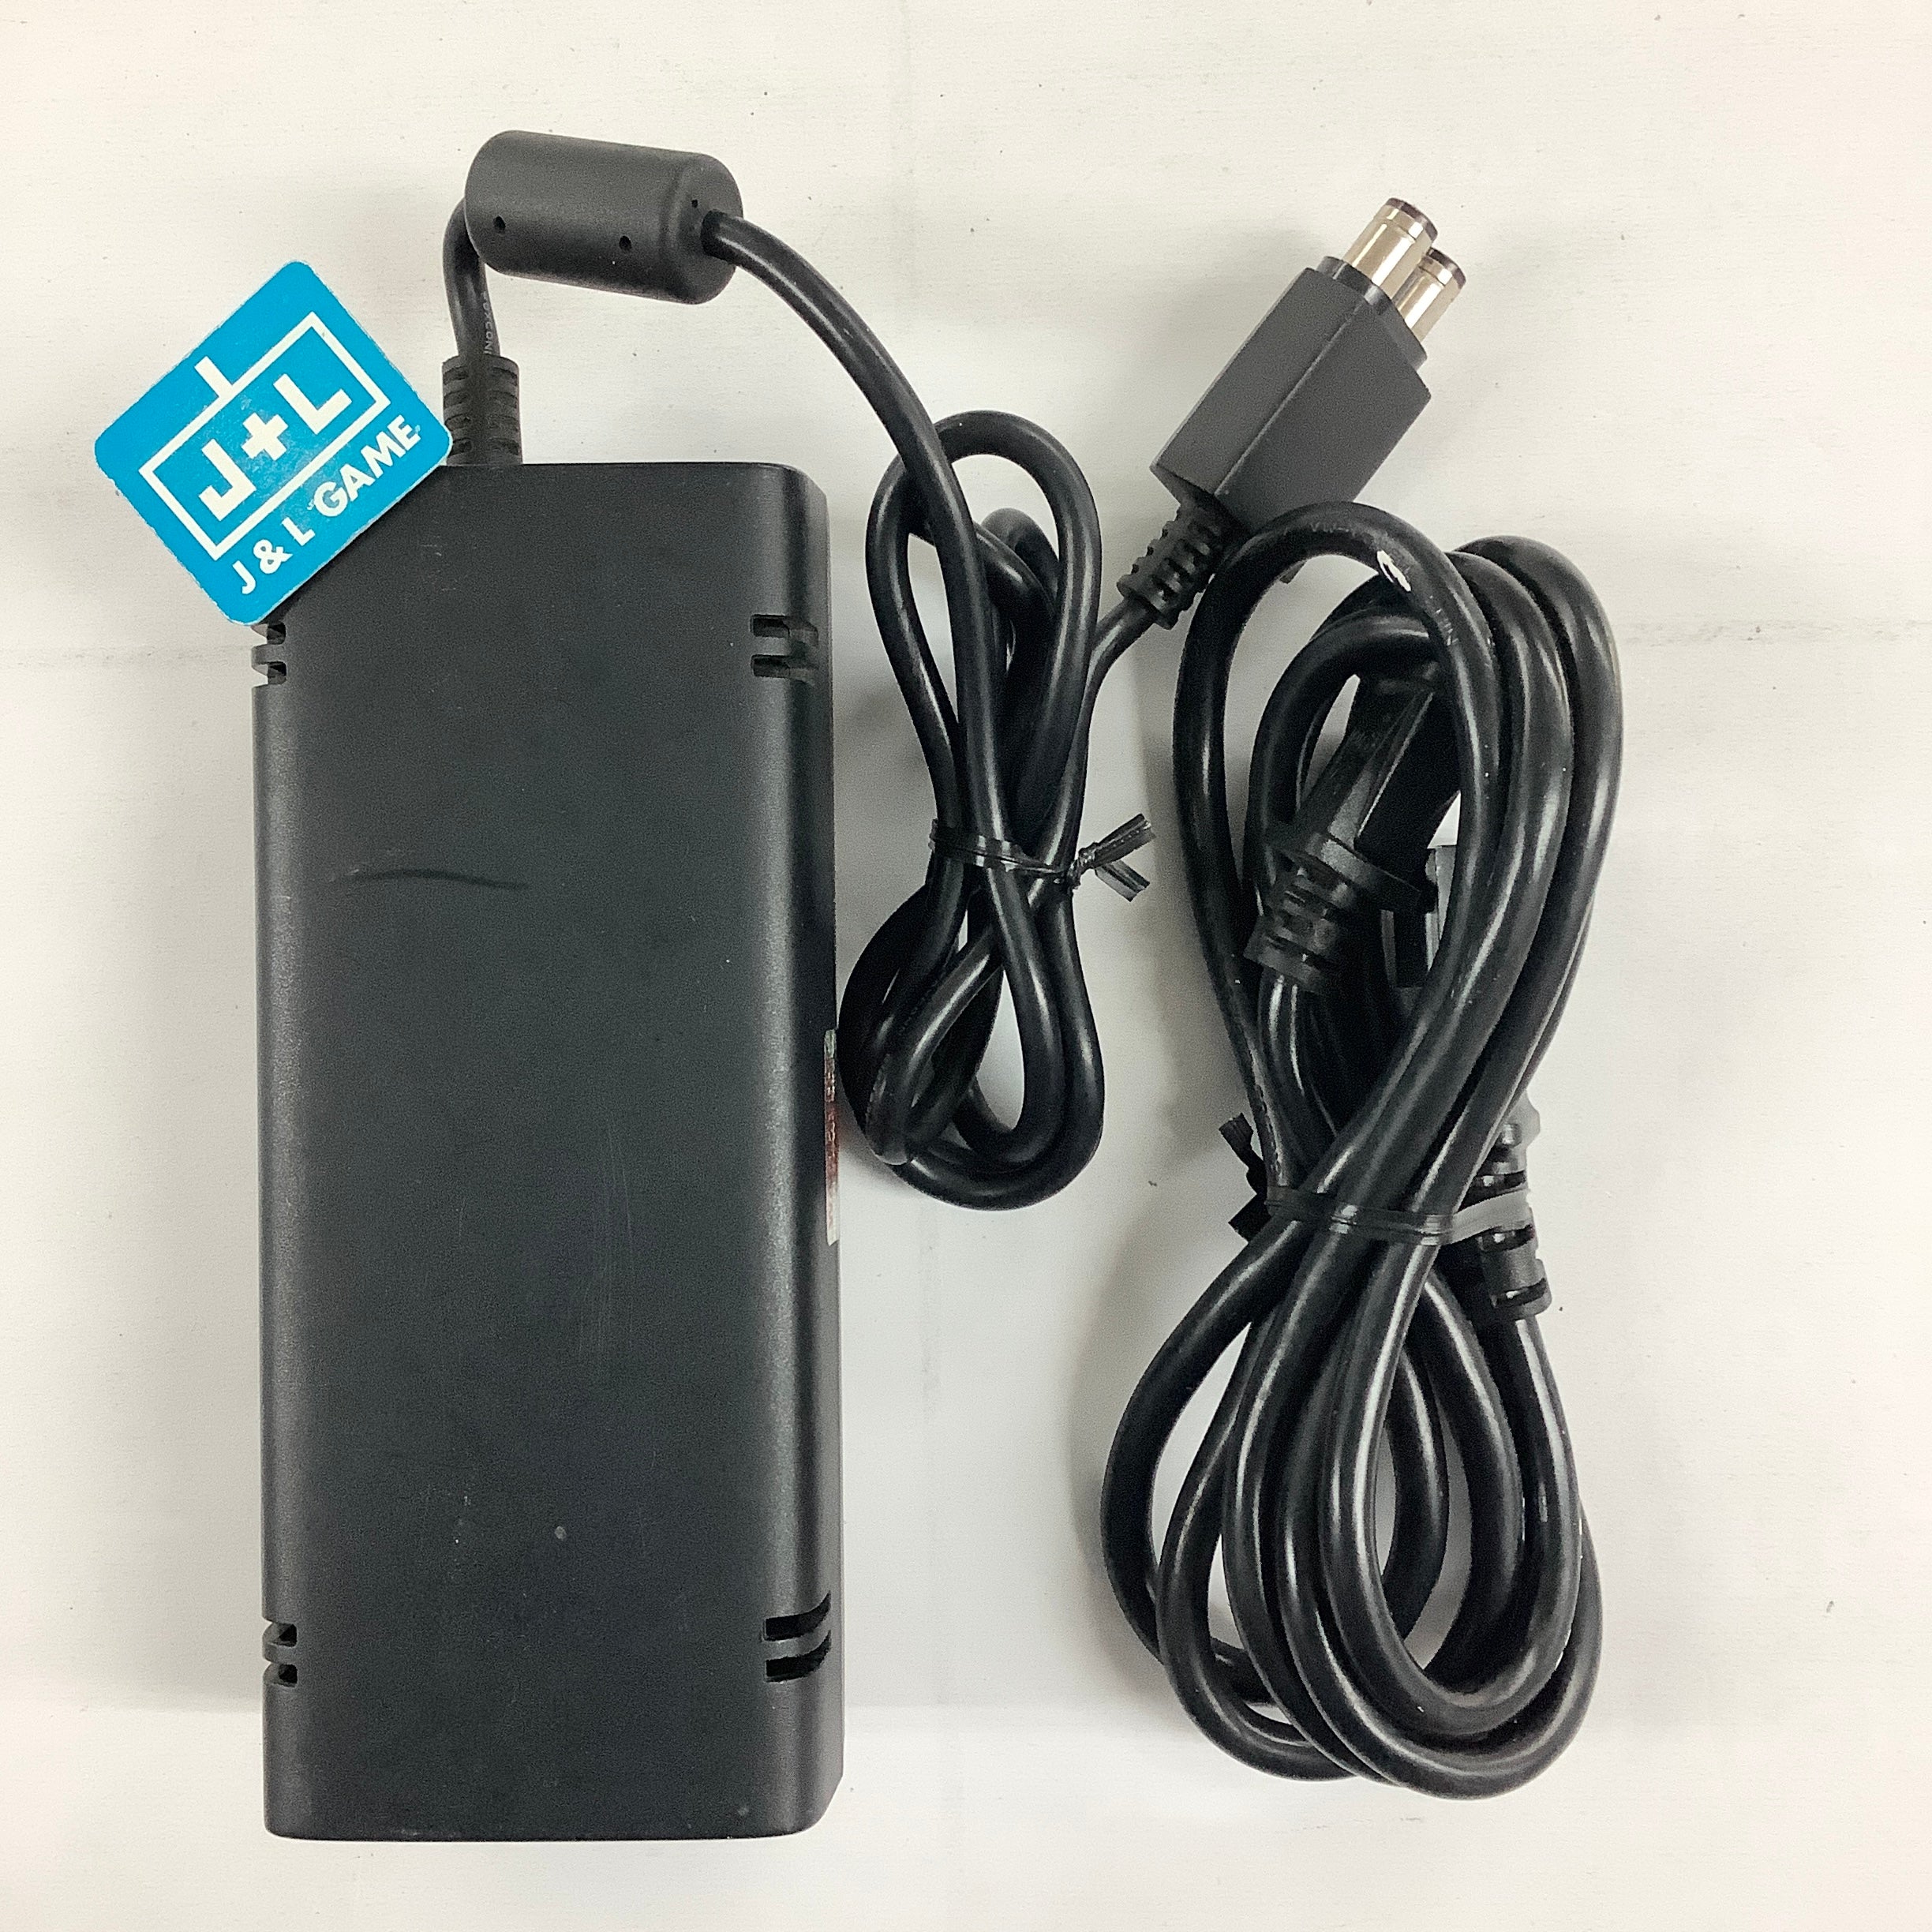 Microsoft Xbox 360 Slim Power Supply AC Adapter - Xbox 360 [Pre-Owned] Accessories Microsoft   